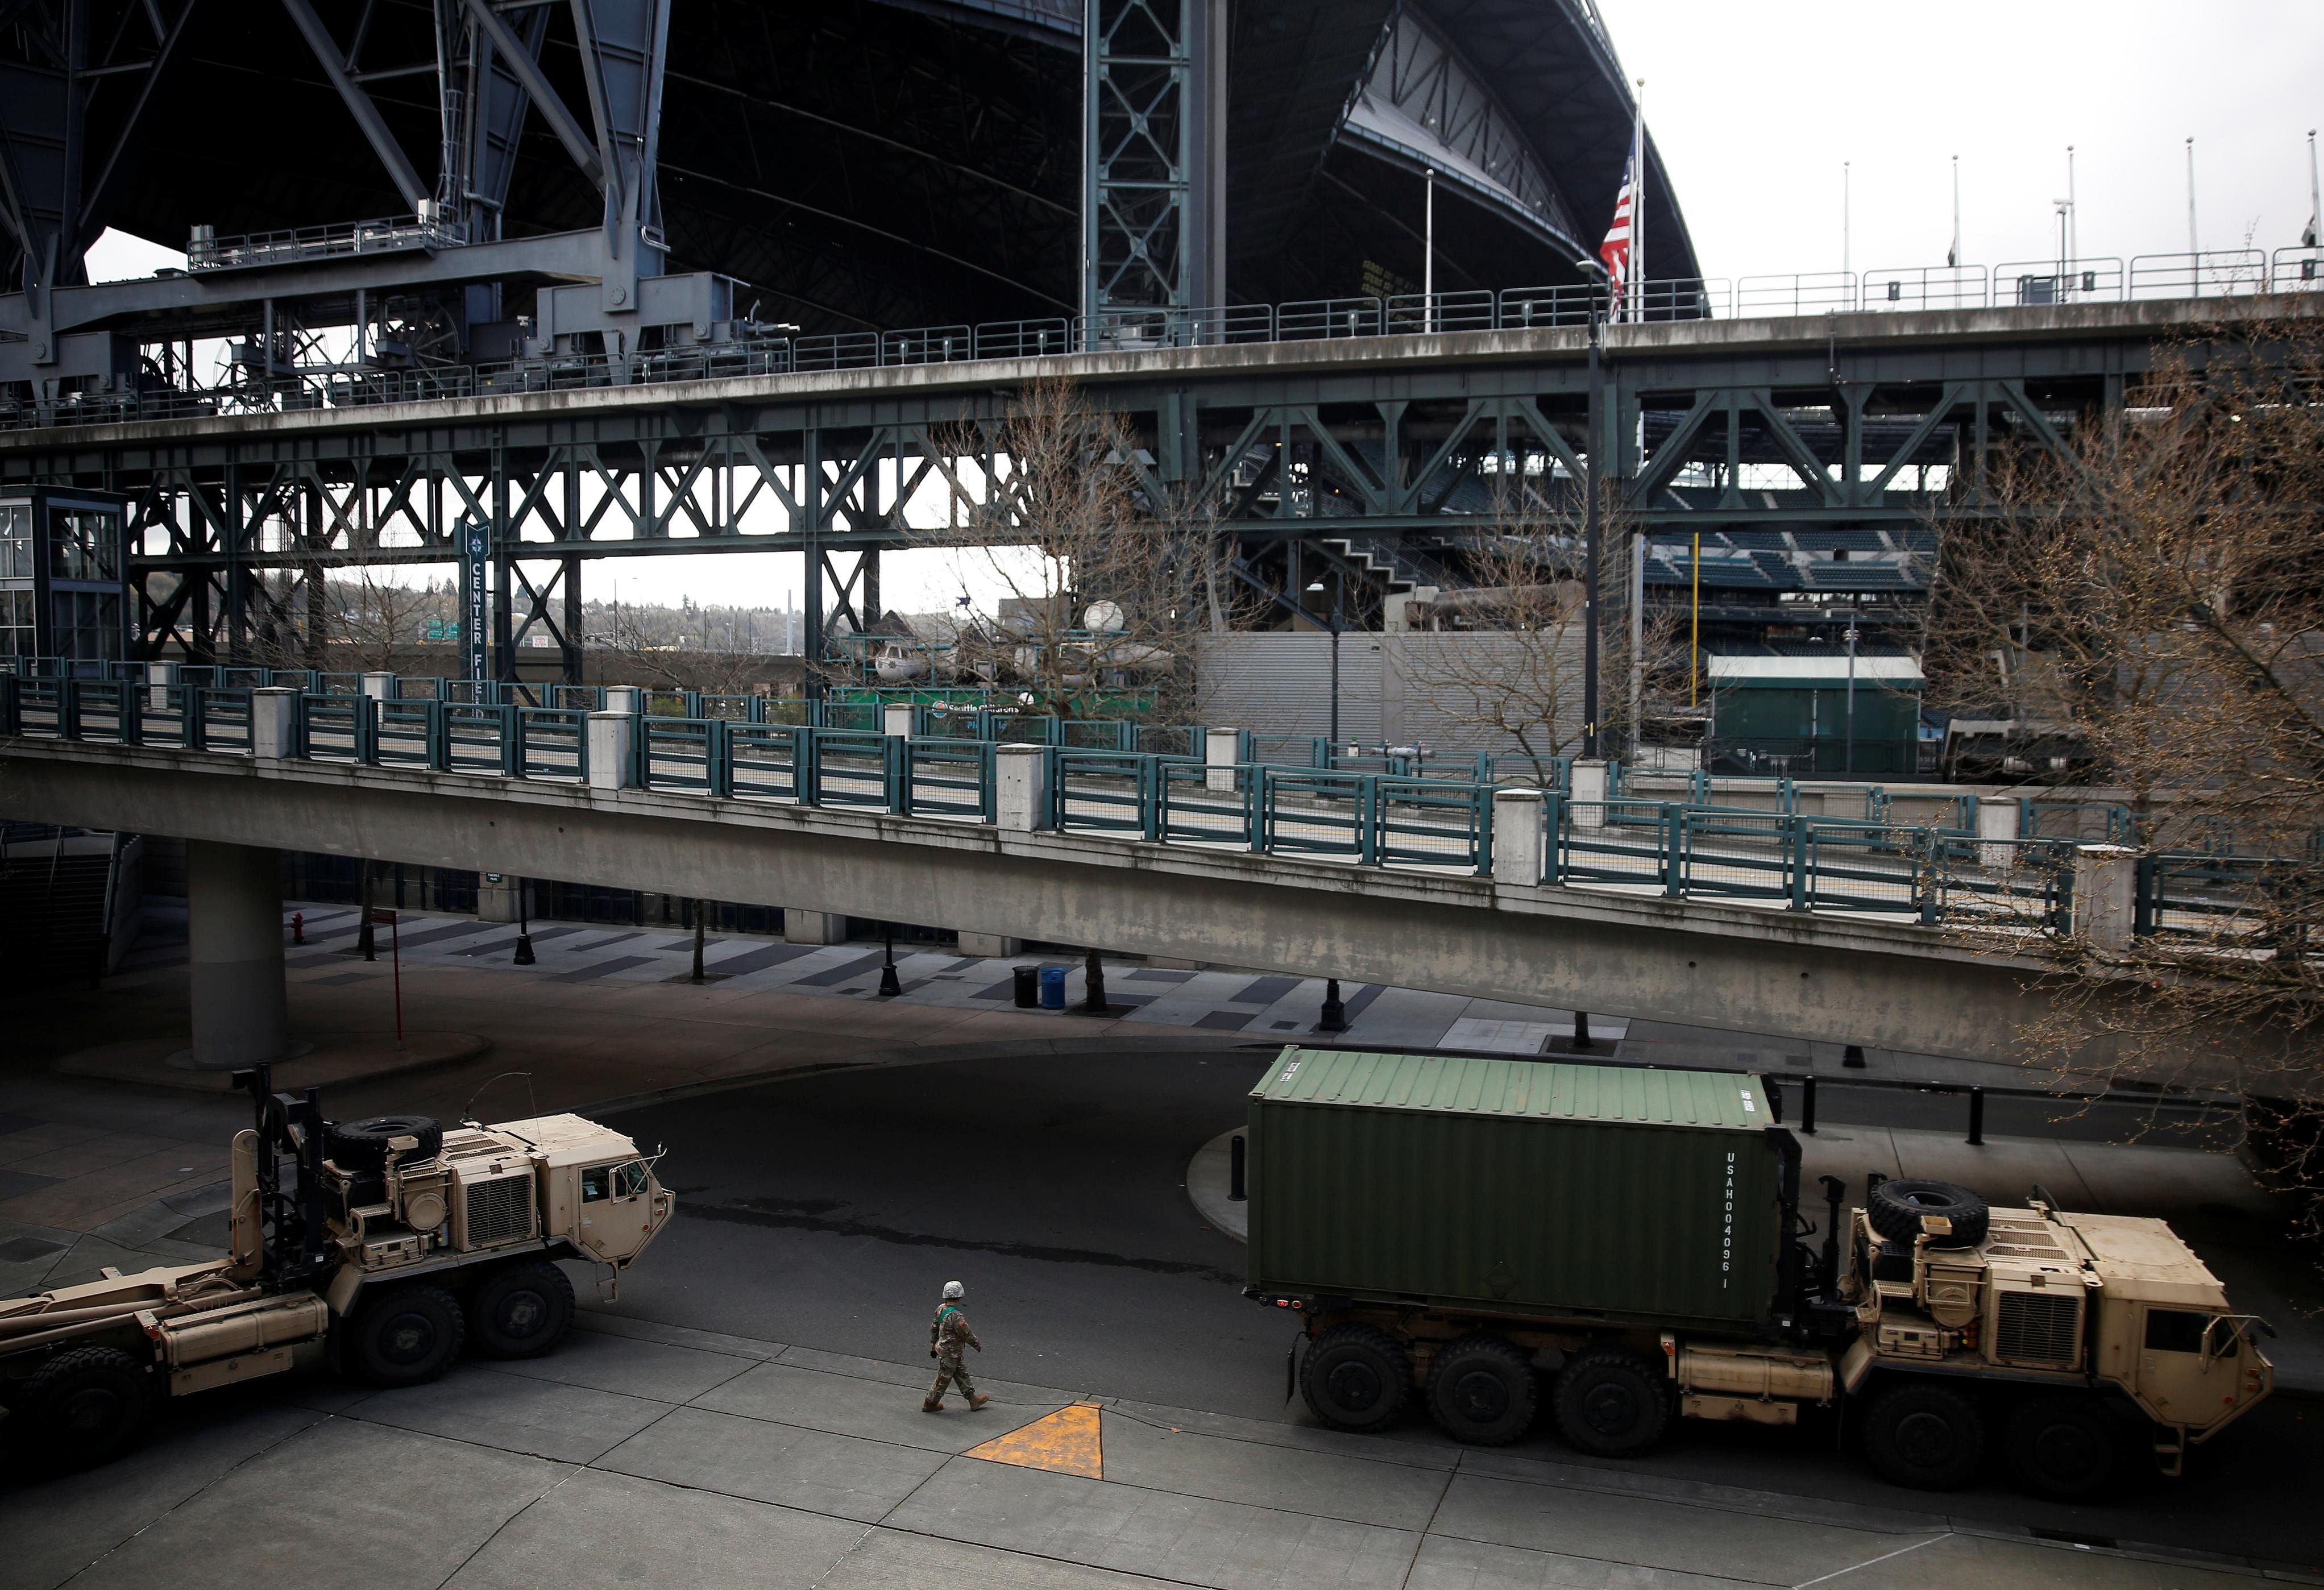 Military vehicles drive out of a field hospital for non-coronavirus patients inside CenturyLink Field Event Center, T-Mobile Park seen in the background, during the coronavirus disease (COVID-19) outbreak in Seattle, Washington. (Credit: Reuters)